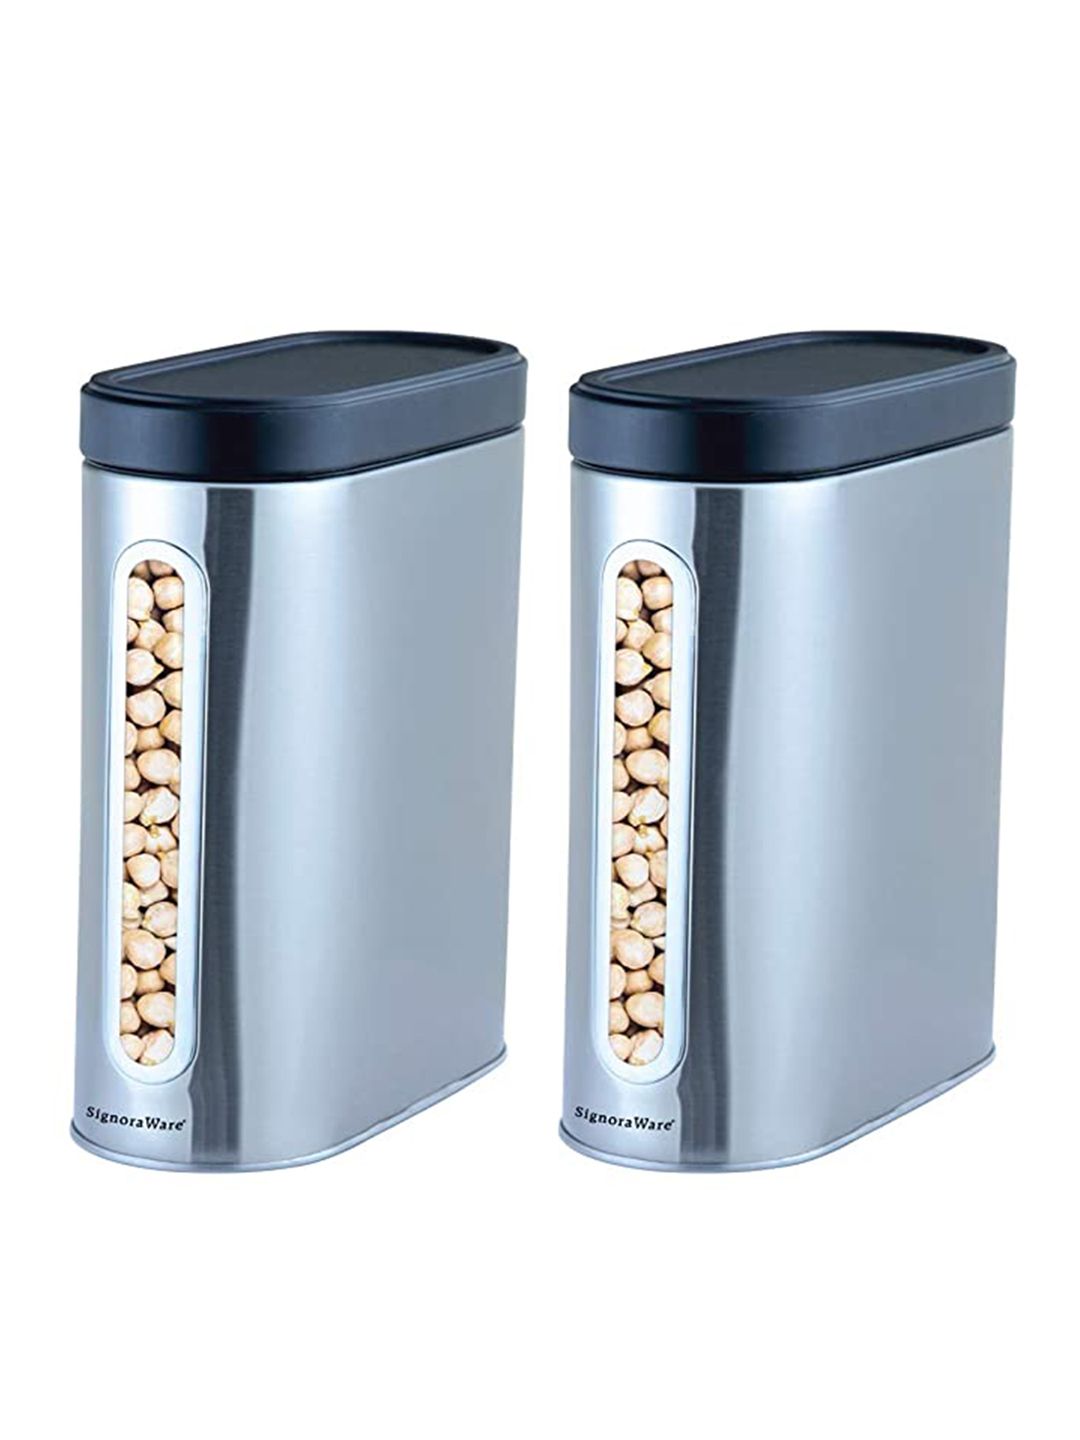 SignoraWare Set Of 2 Silver-Toned & Black Solid Modular Steel Containers Price in India